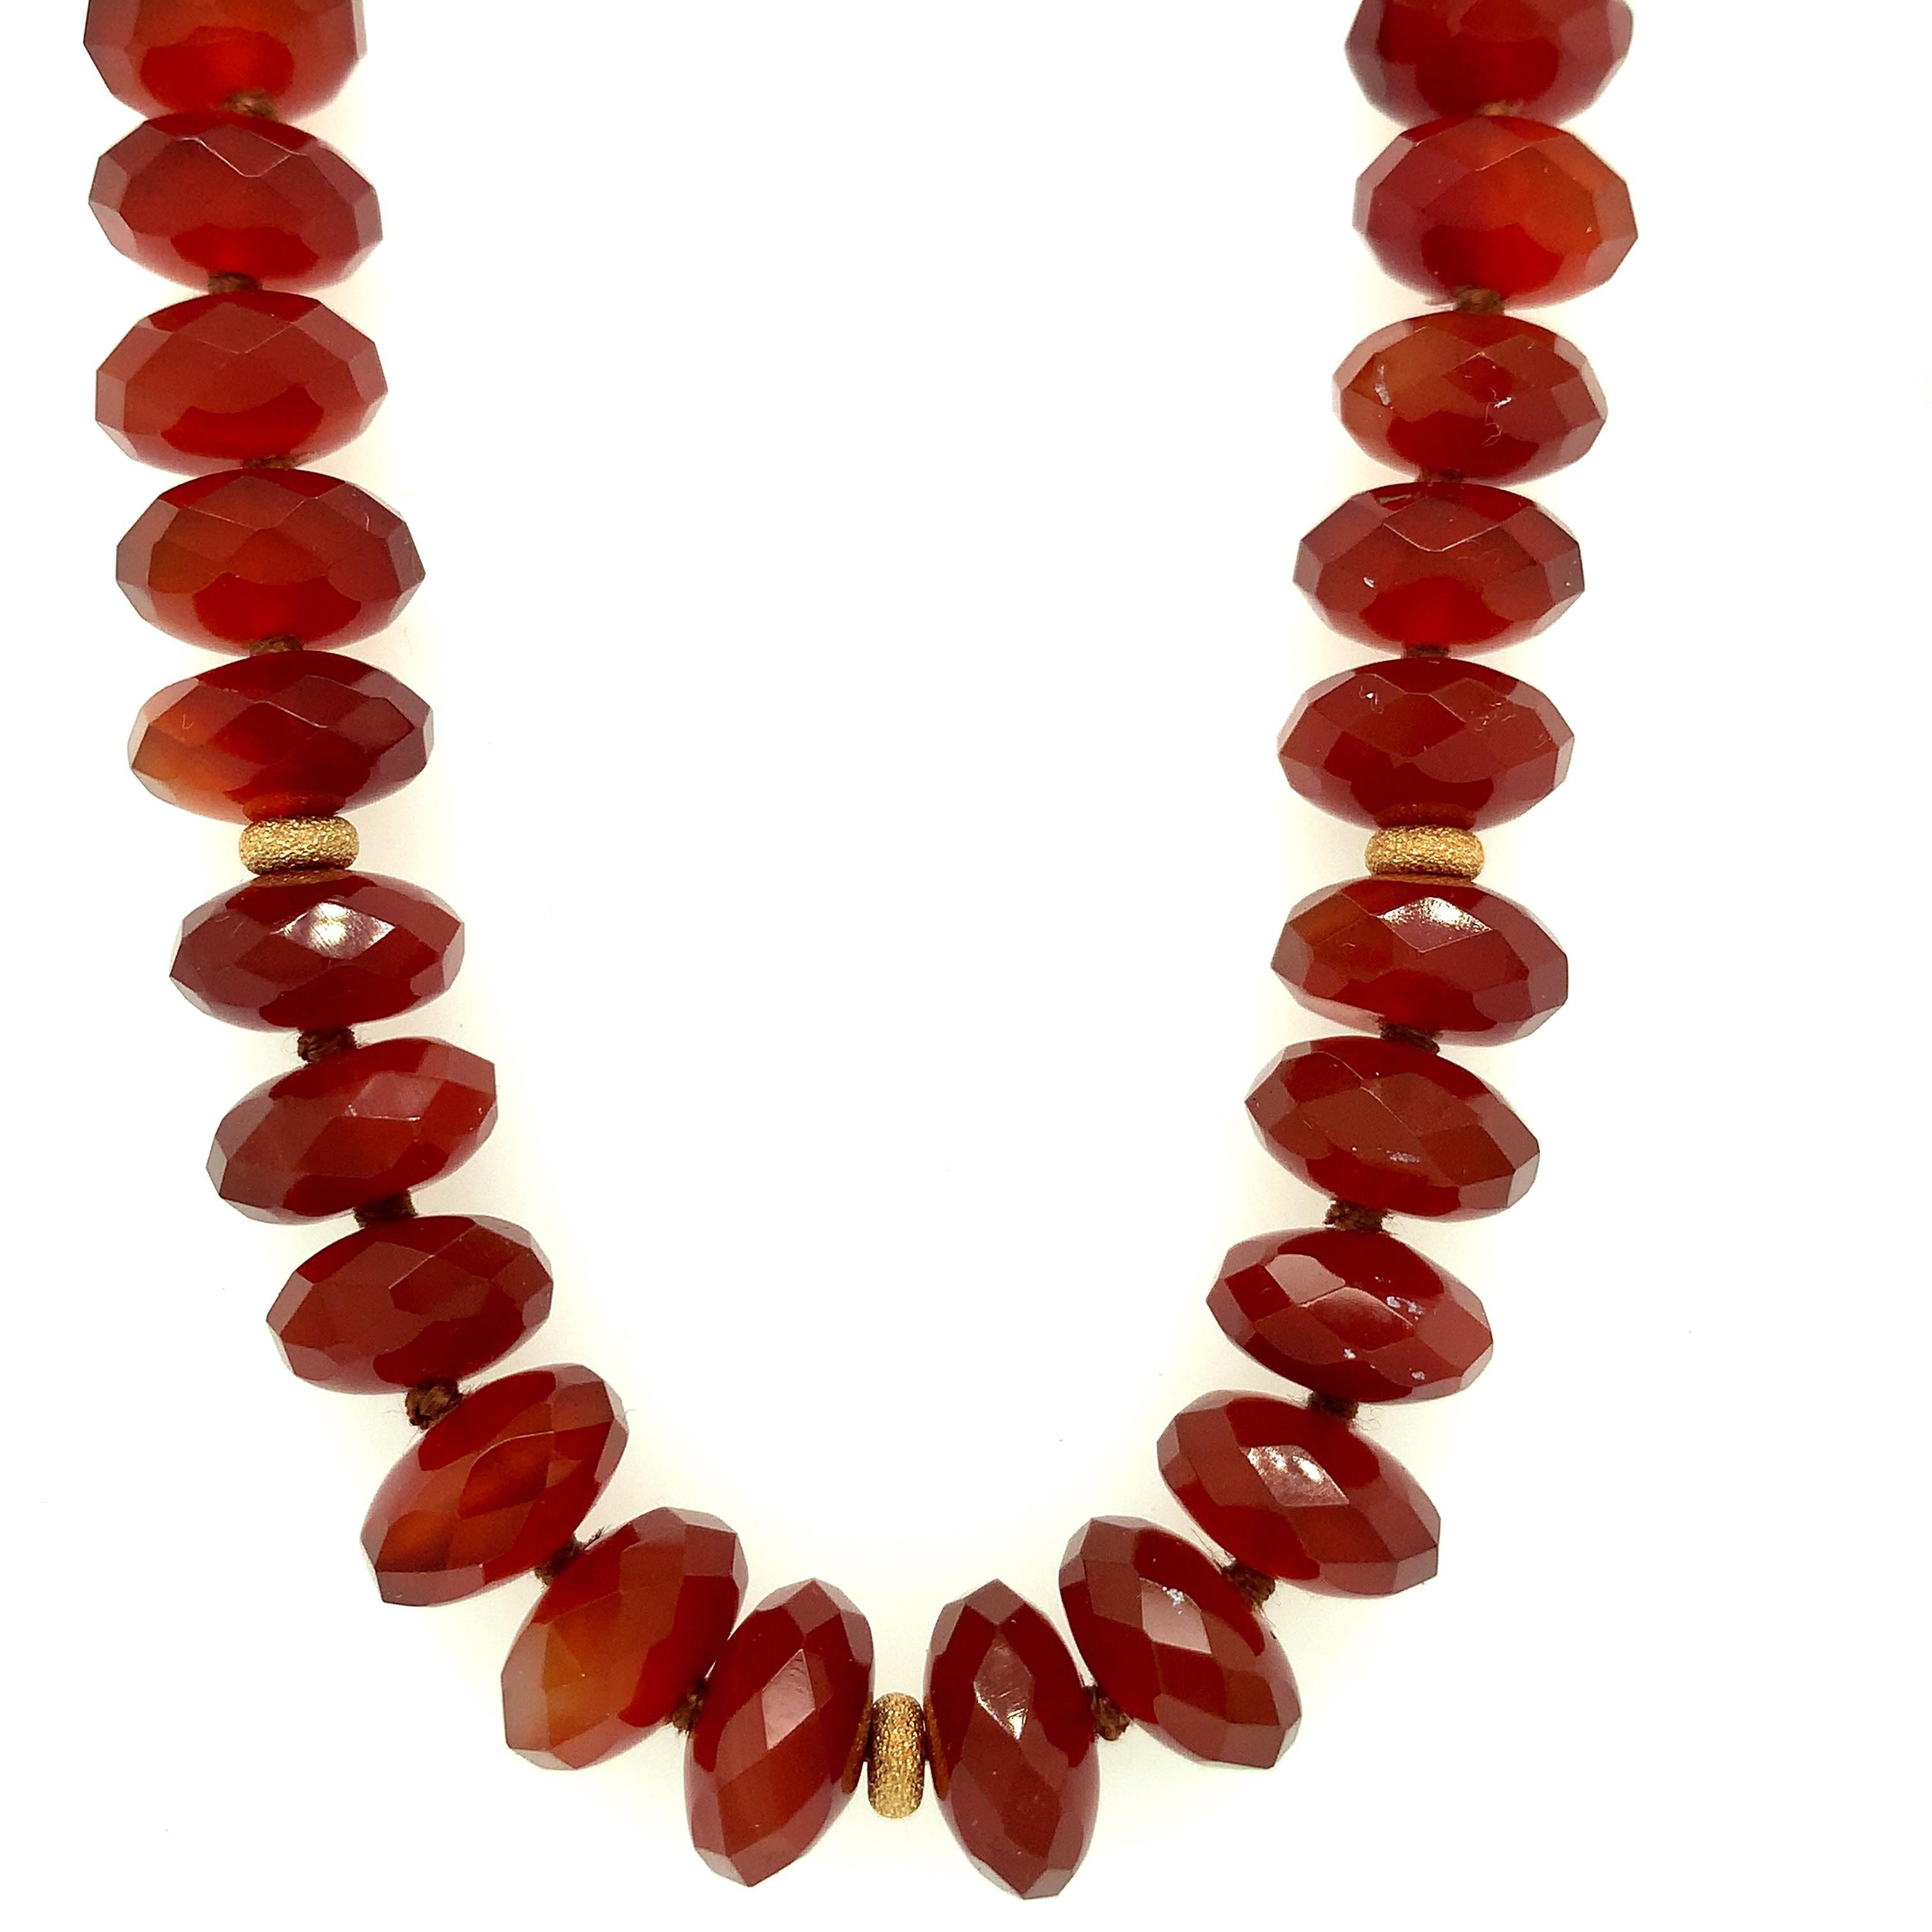 This strand of red carnelian faceted beads is so pretty! Carnelian is the reddish variety of chalcedony quartz, a colorful and versatile gem material so popular in jewelry as beads and cabochons. These beads have rich, even color and have been